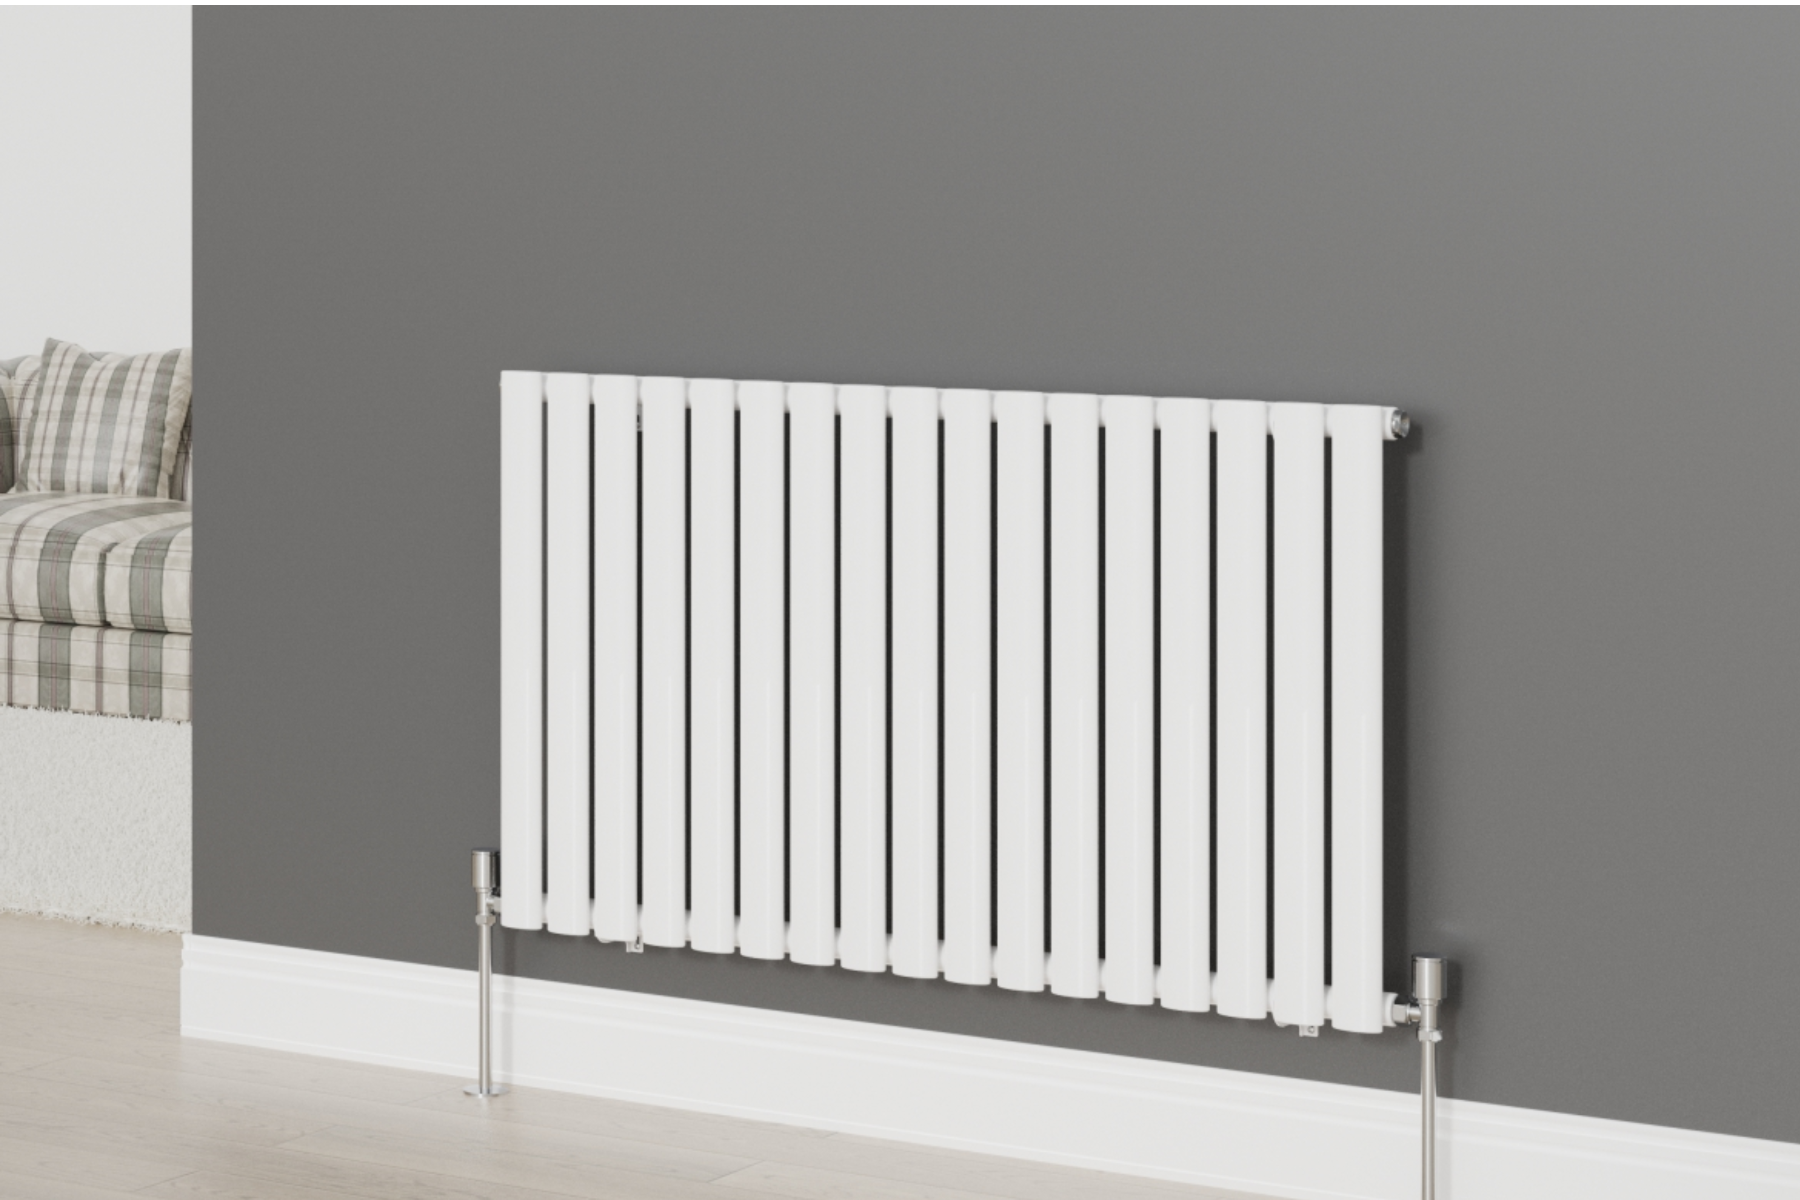 White Panel Radiator In House Setting Against Grey Wall